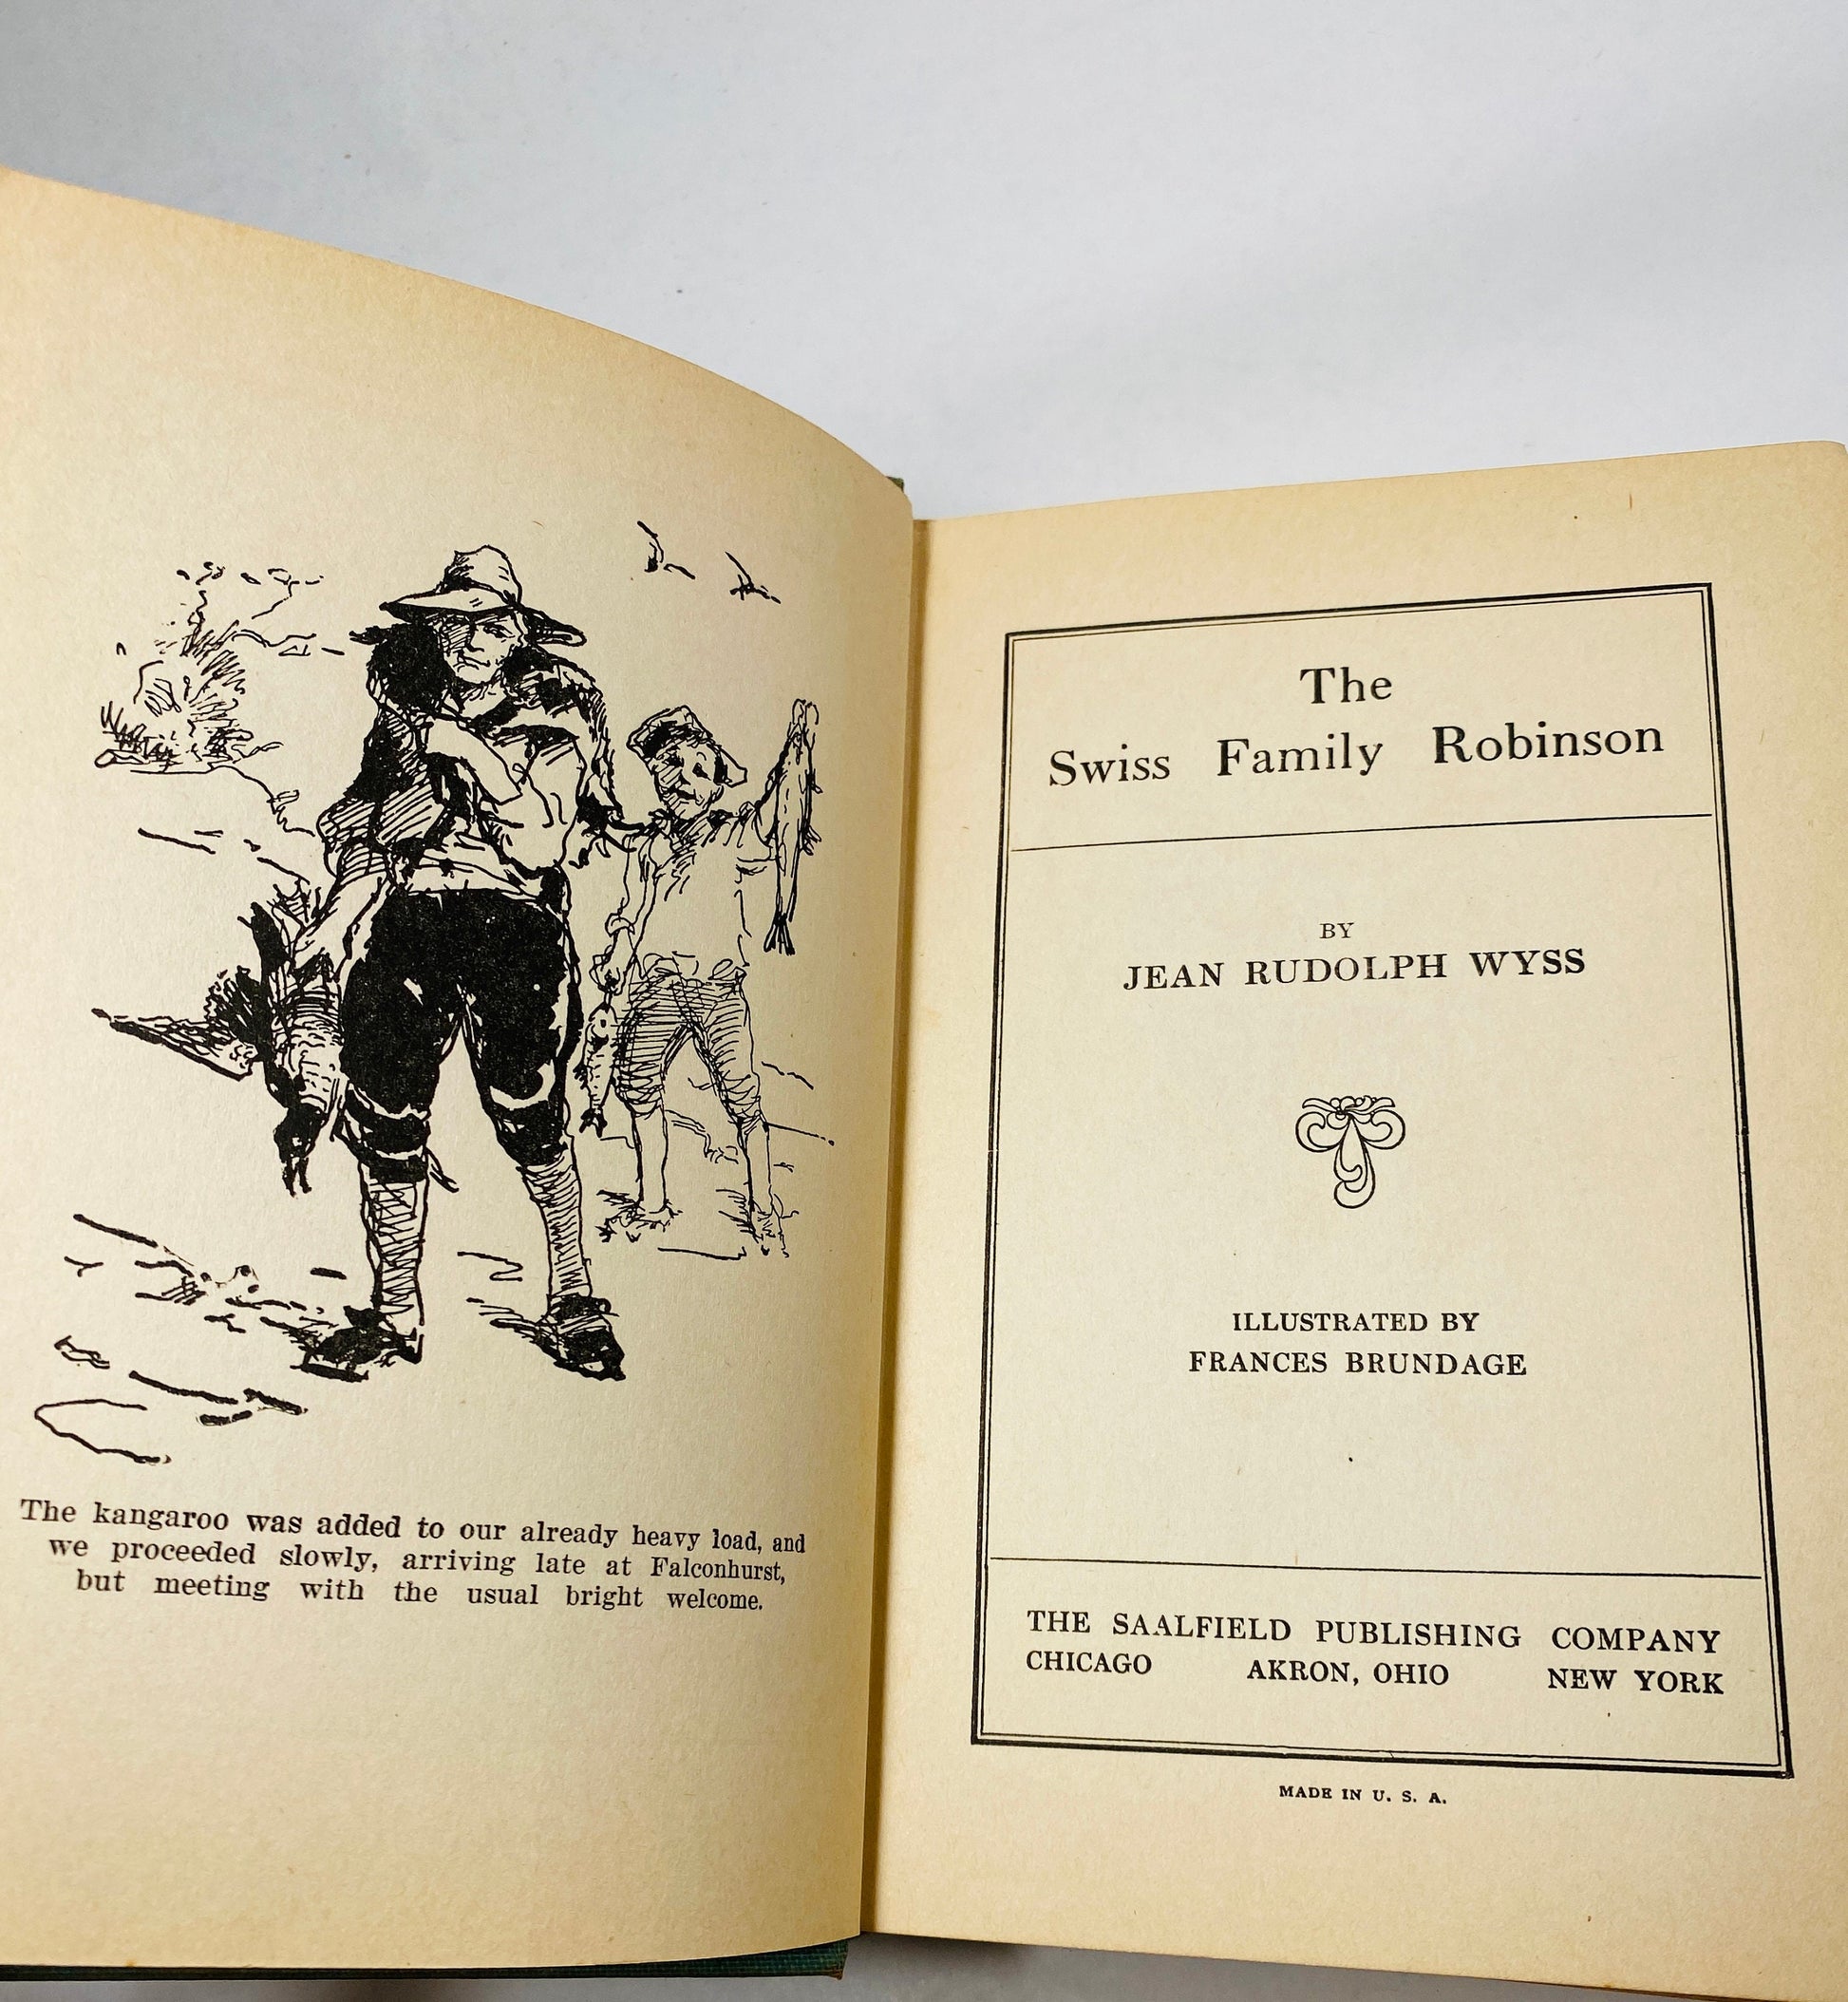 1924 Swiss Family Robinson vintage book by Johann David Wyss about a family who flee Napoleon and ends up shipwrecked on a deserted island